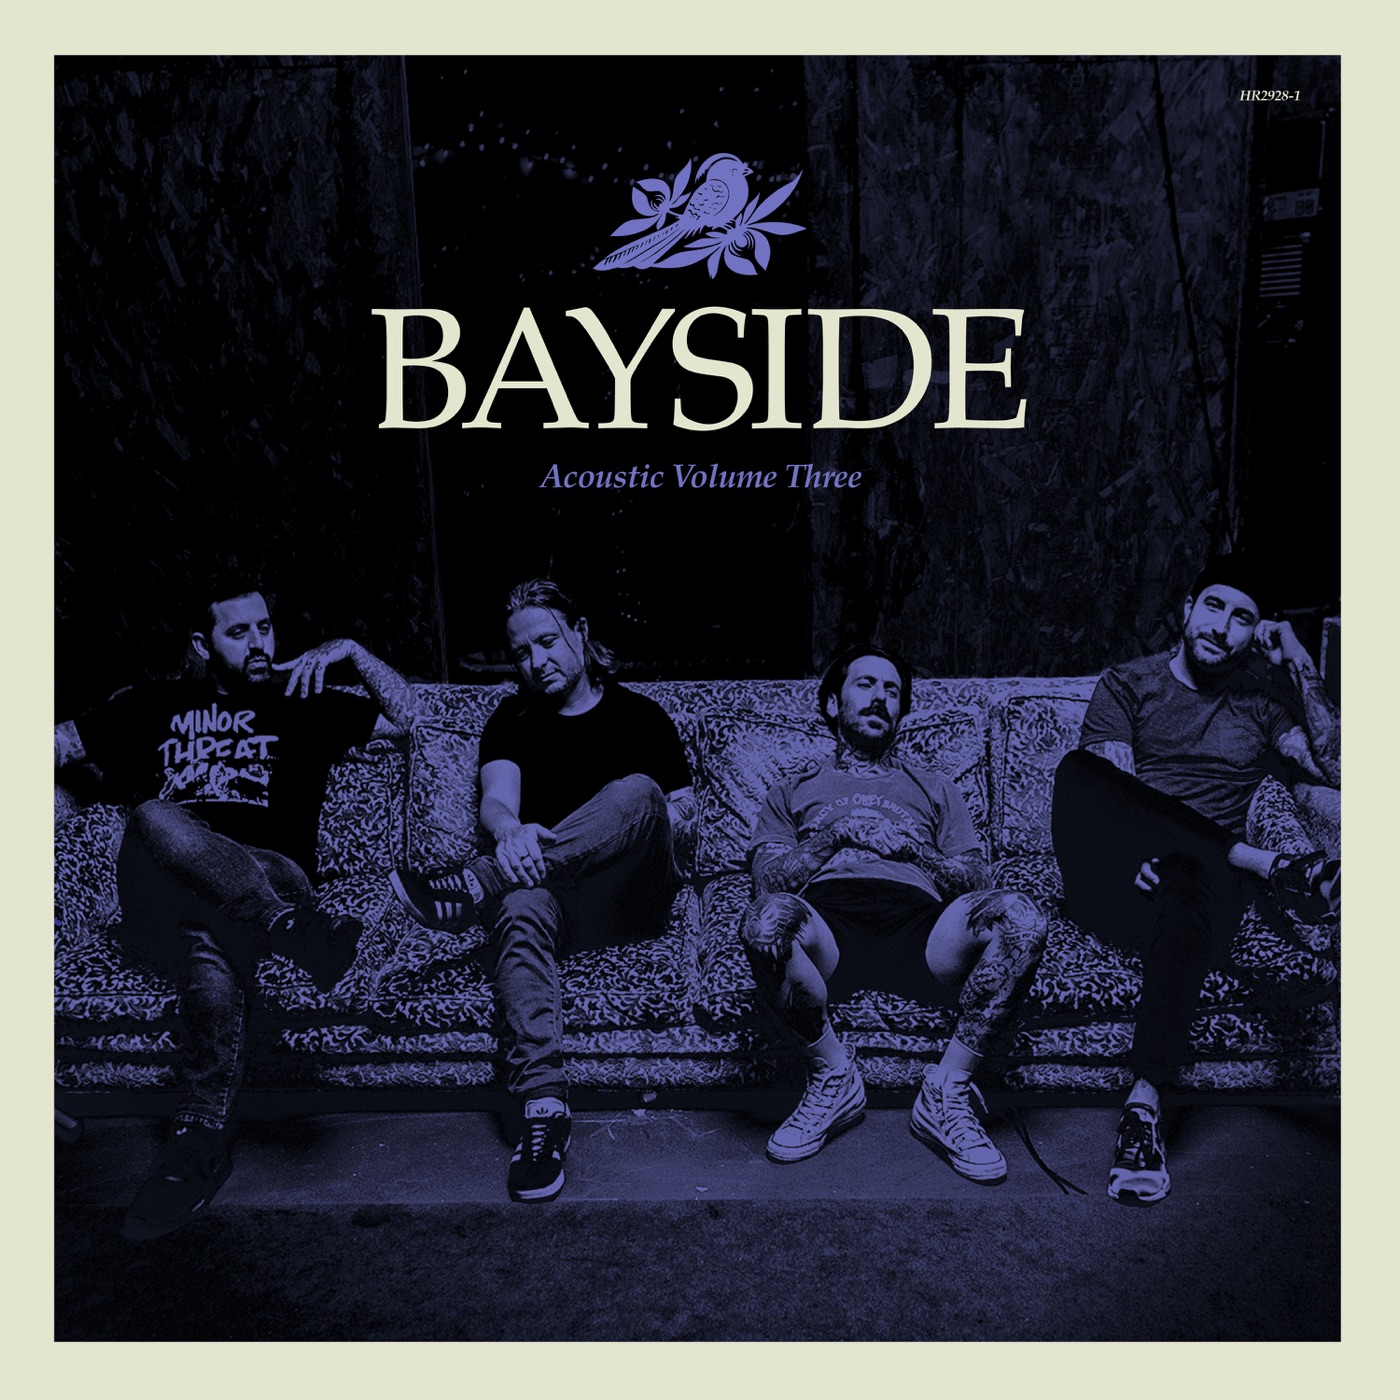 Acoustic Volume 2 by Bayside